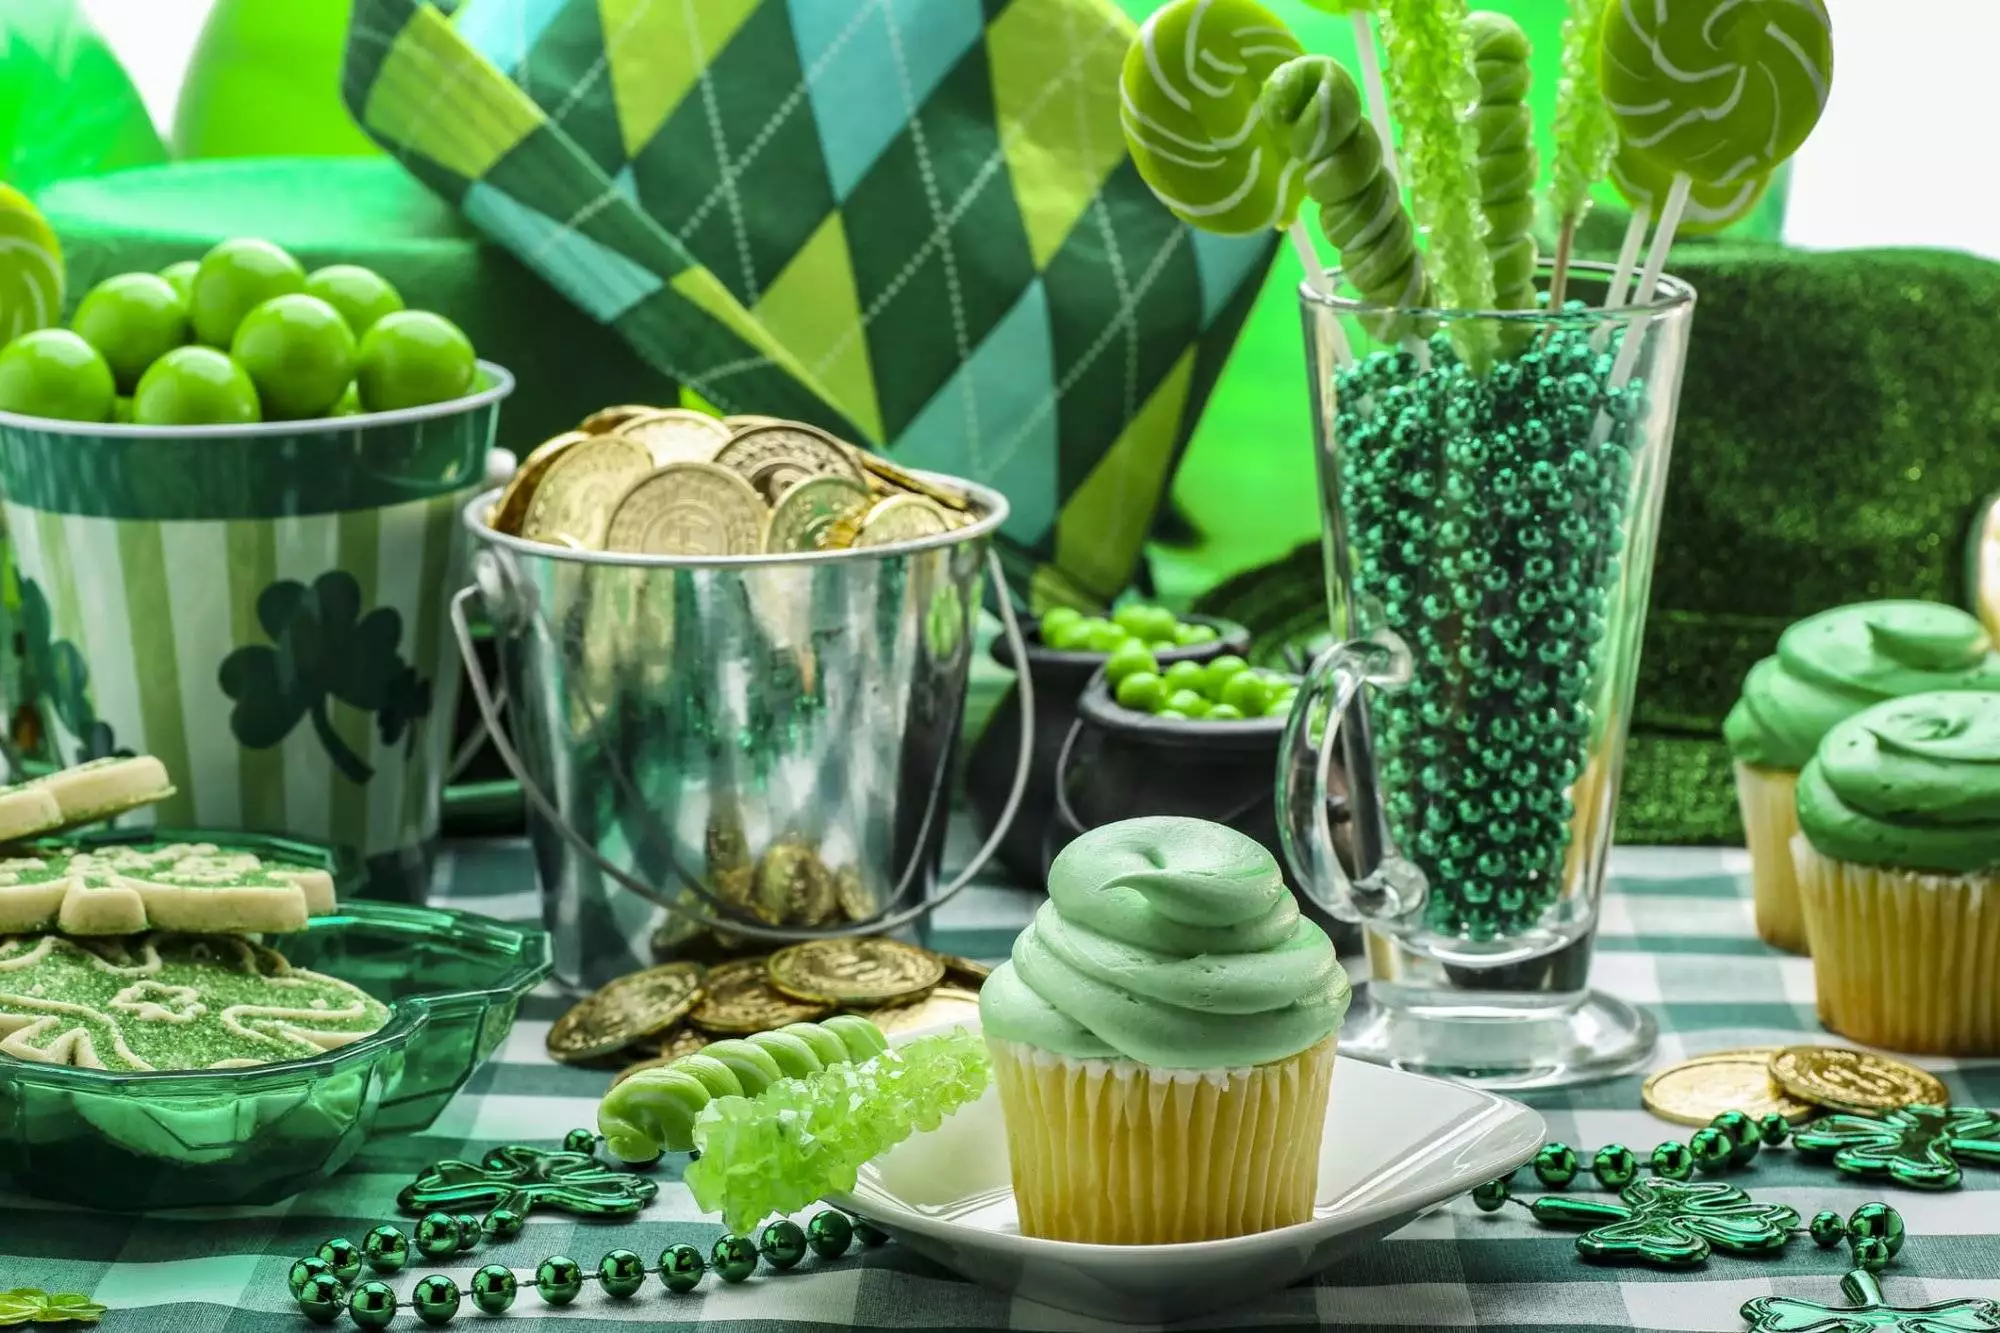 This is a bright and colorful green photograph of St Patrick's day party favors and food